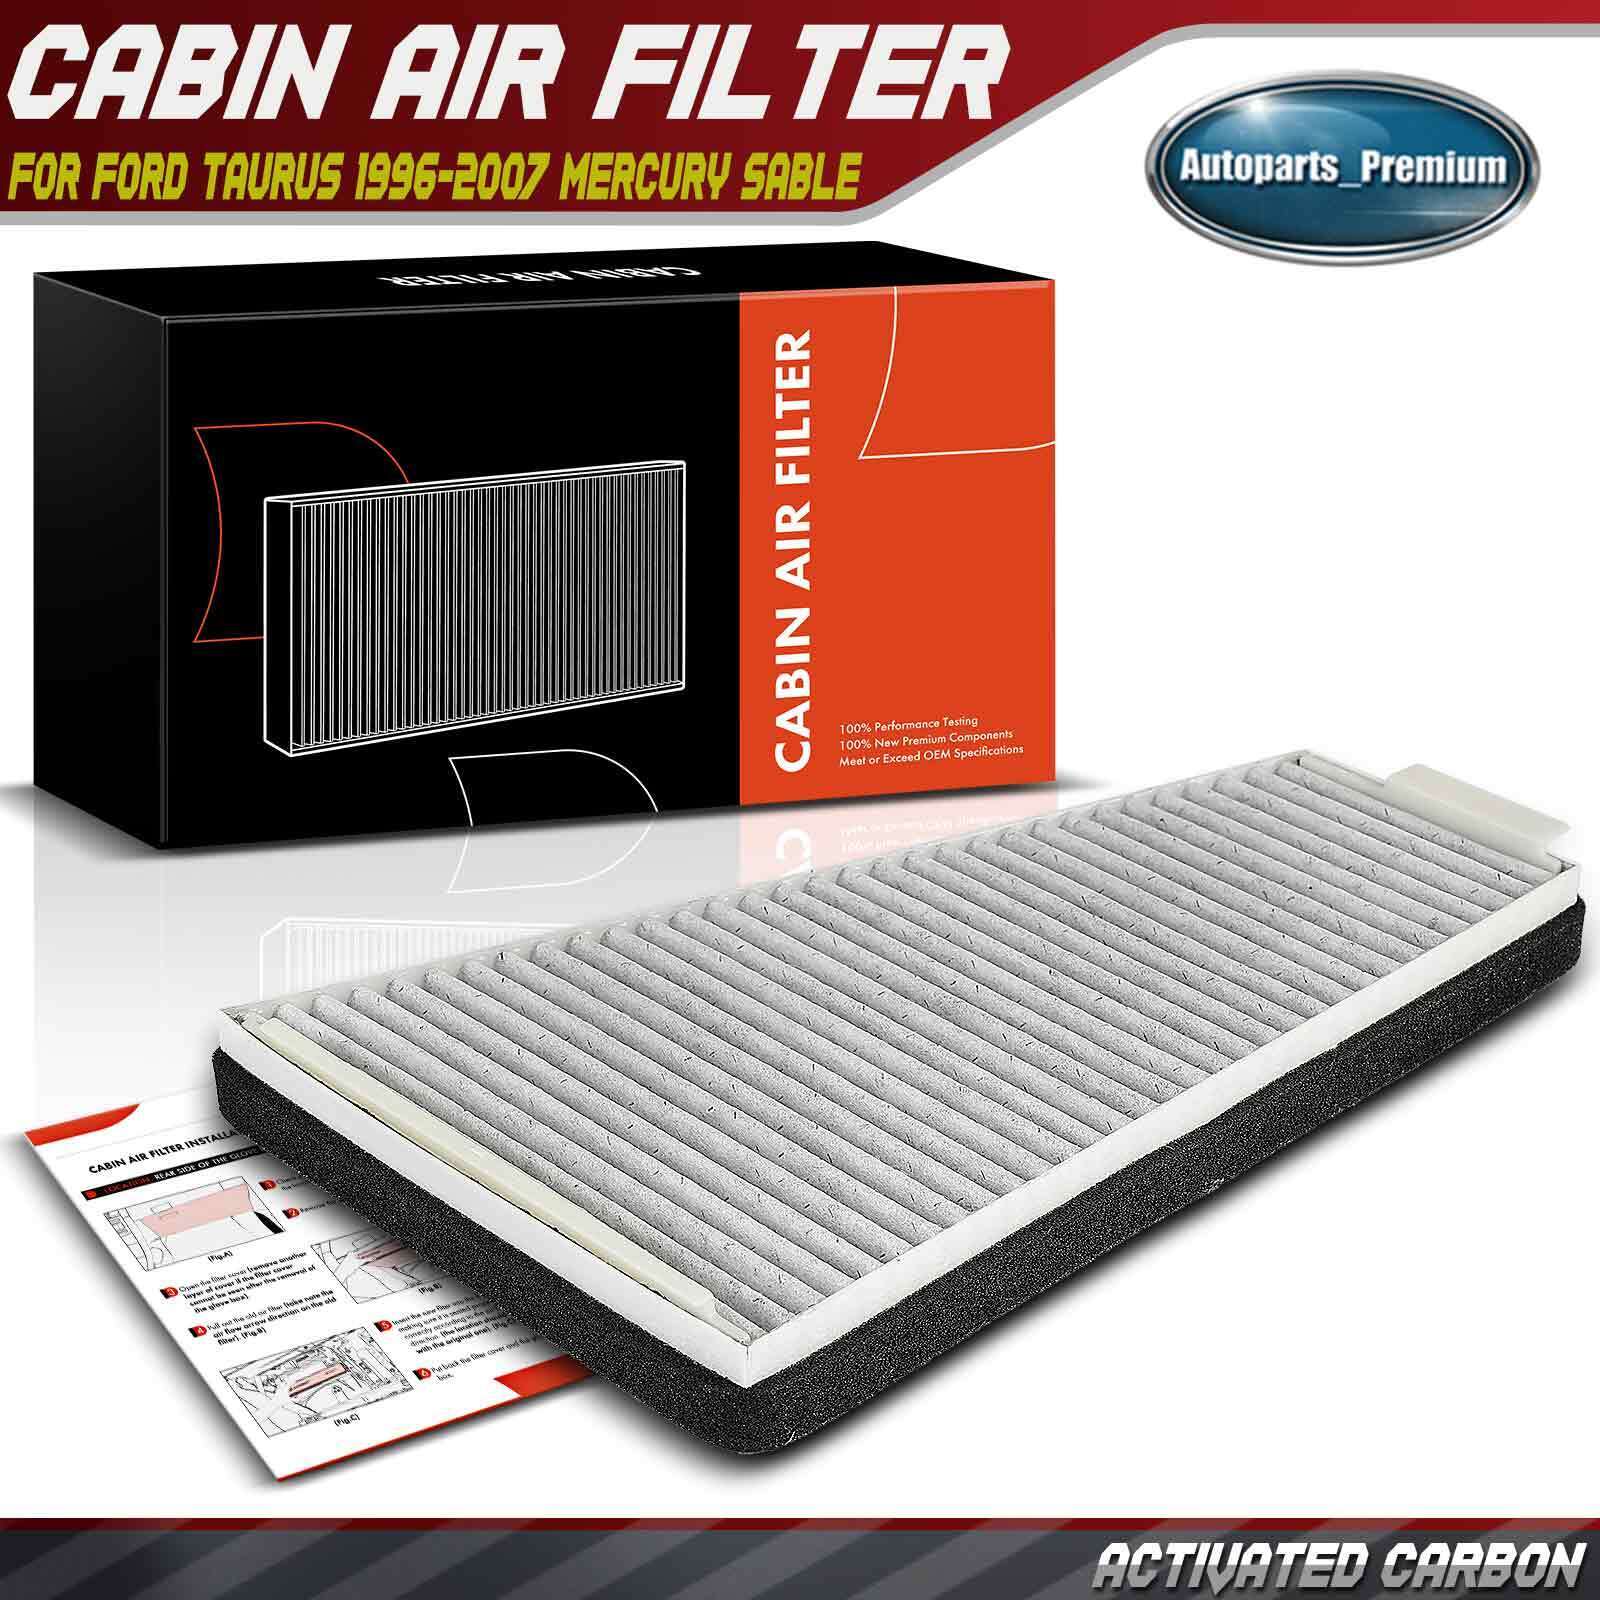 Activated Carbon Cabin Air Filter for Ford Taurus 96-07 Mercury Sable Under Hood